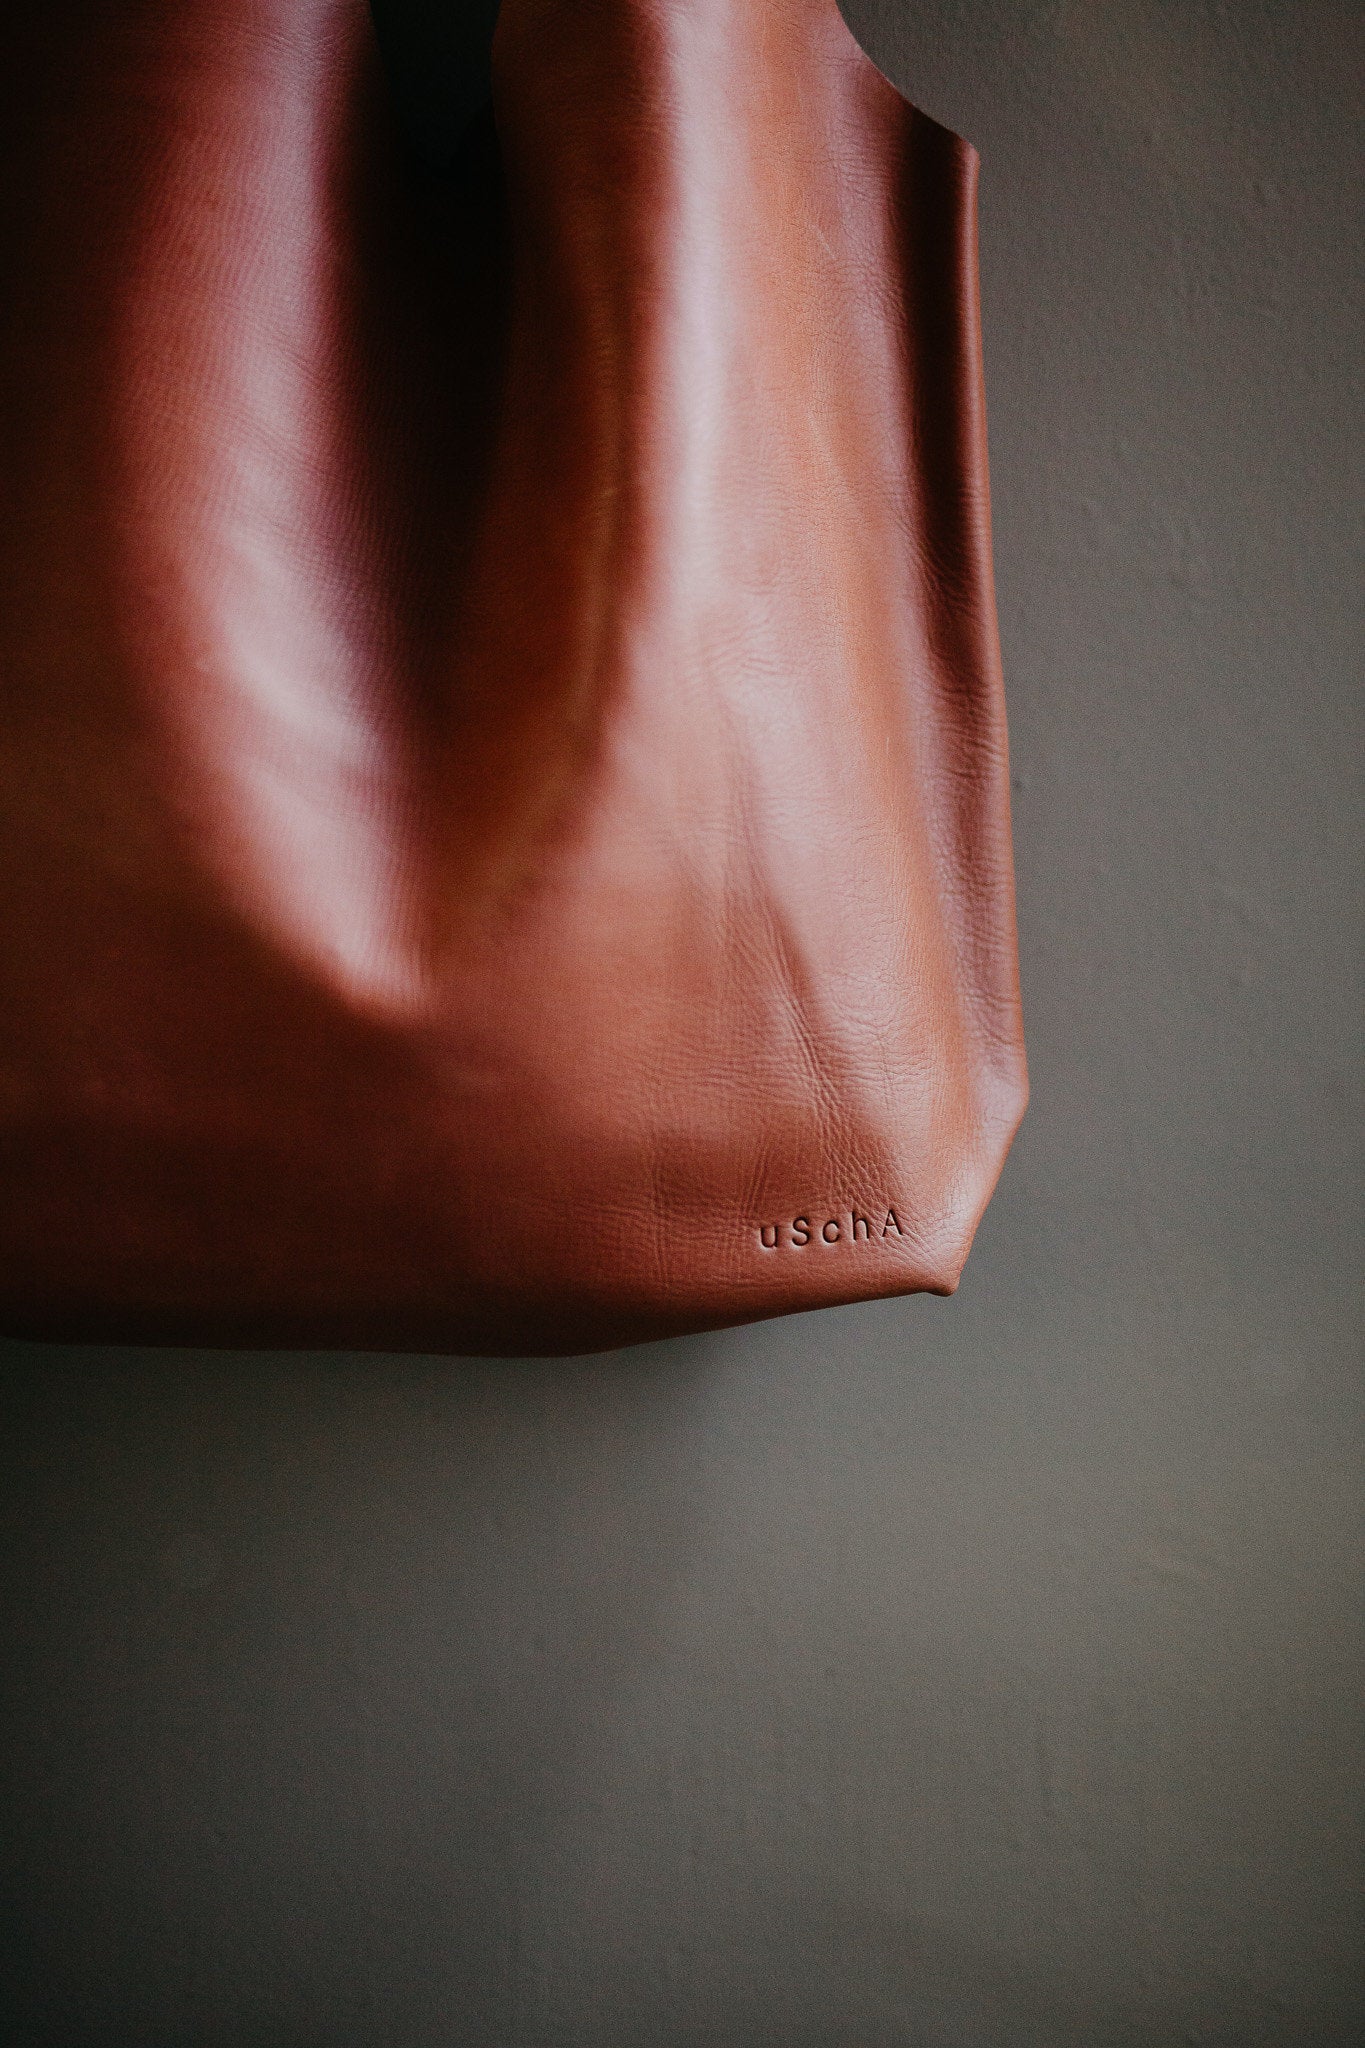 New ECO Leather Totes with Ethical Values